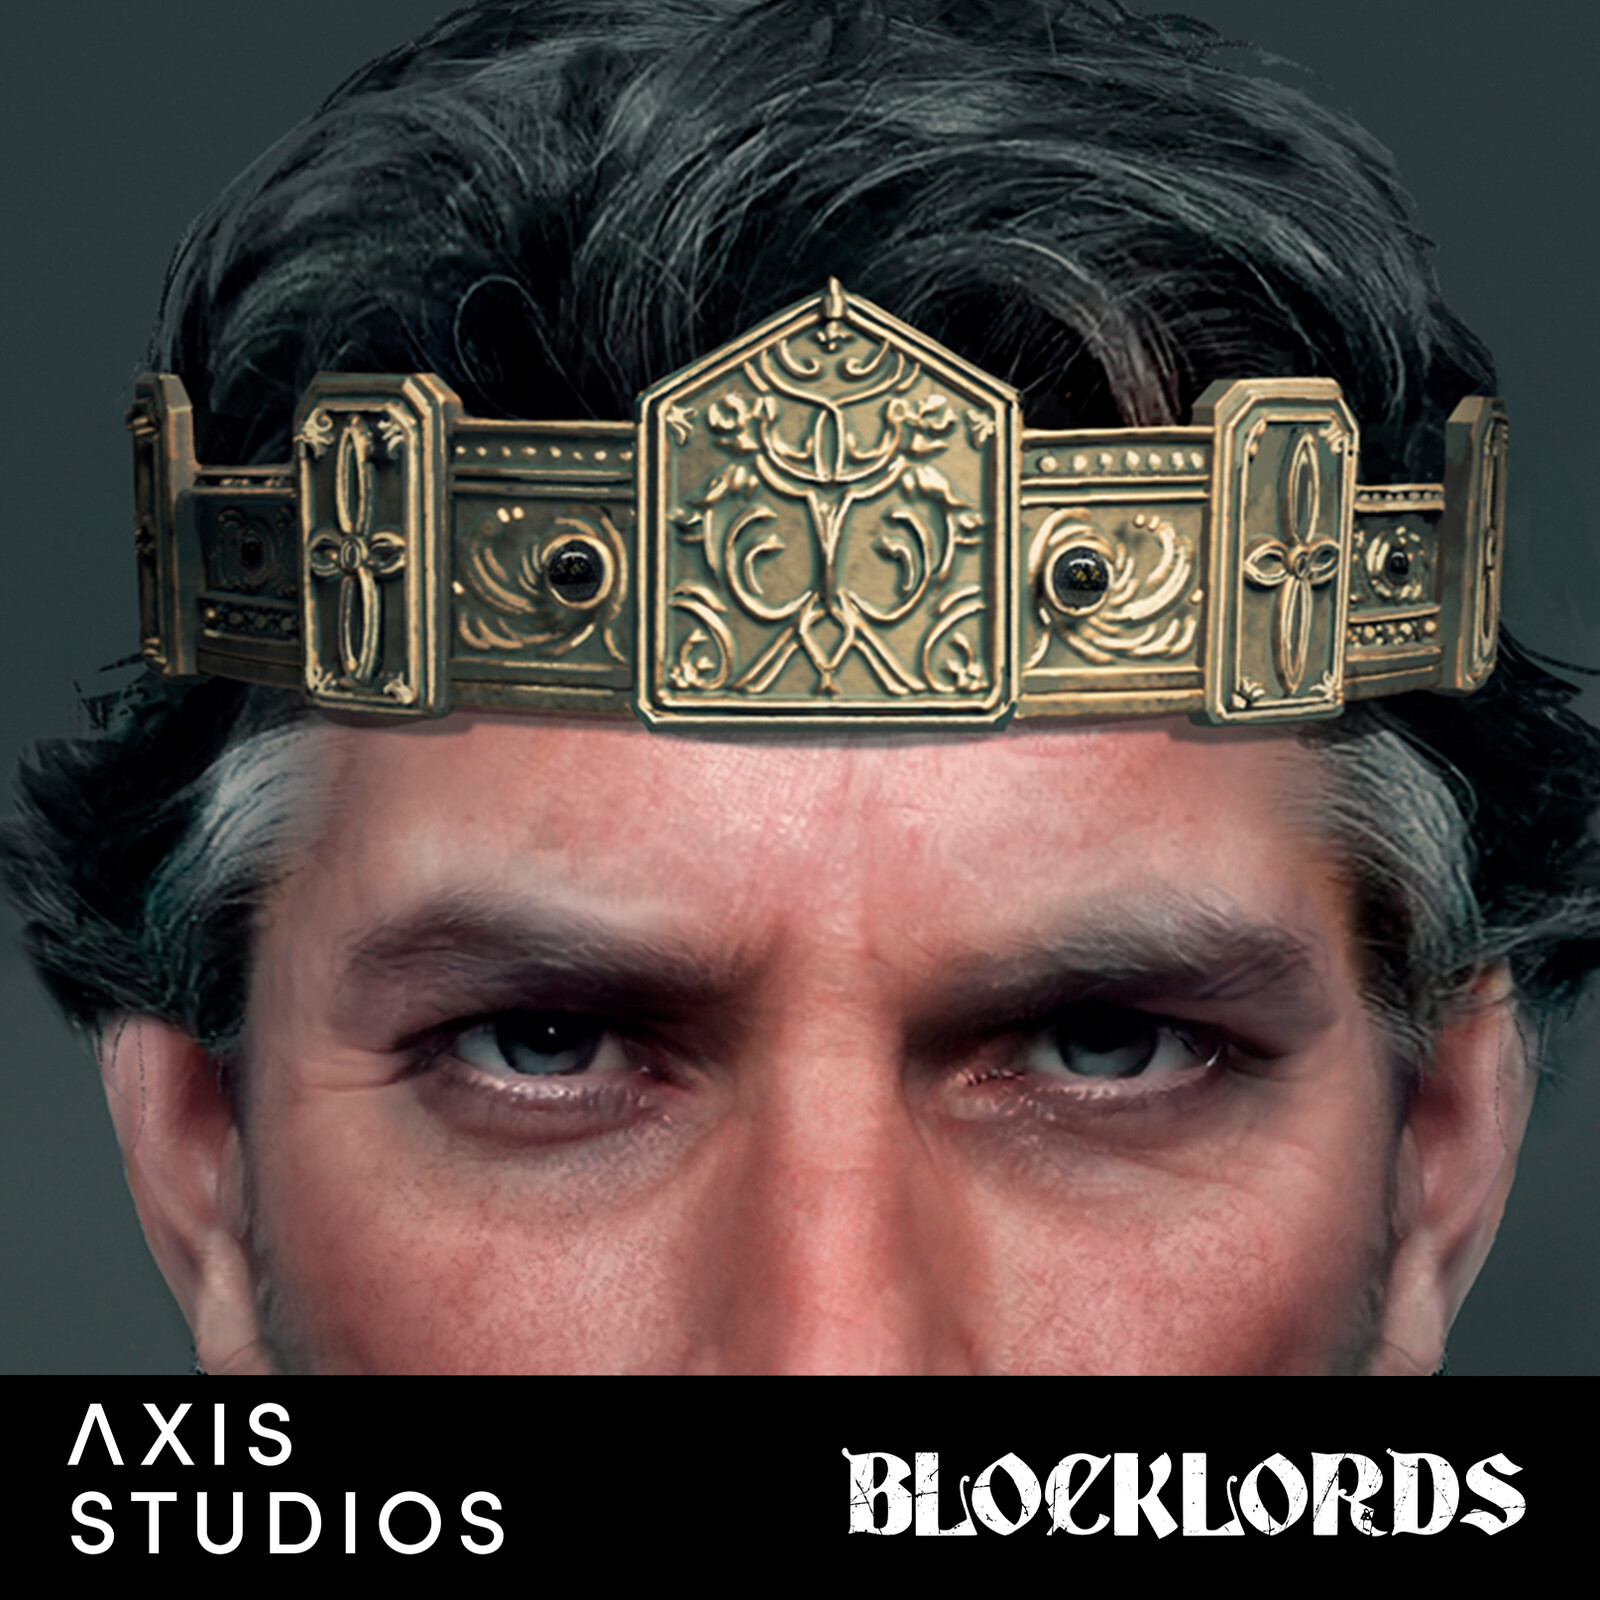 Kings Crown_Protect Your House_Blocklords